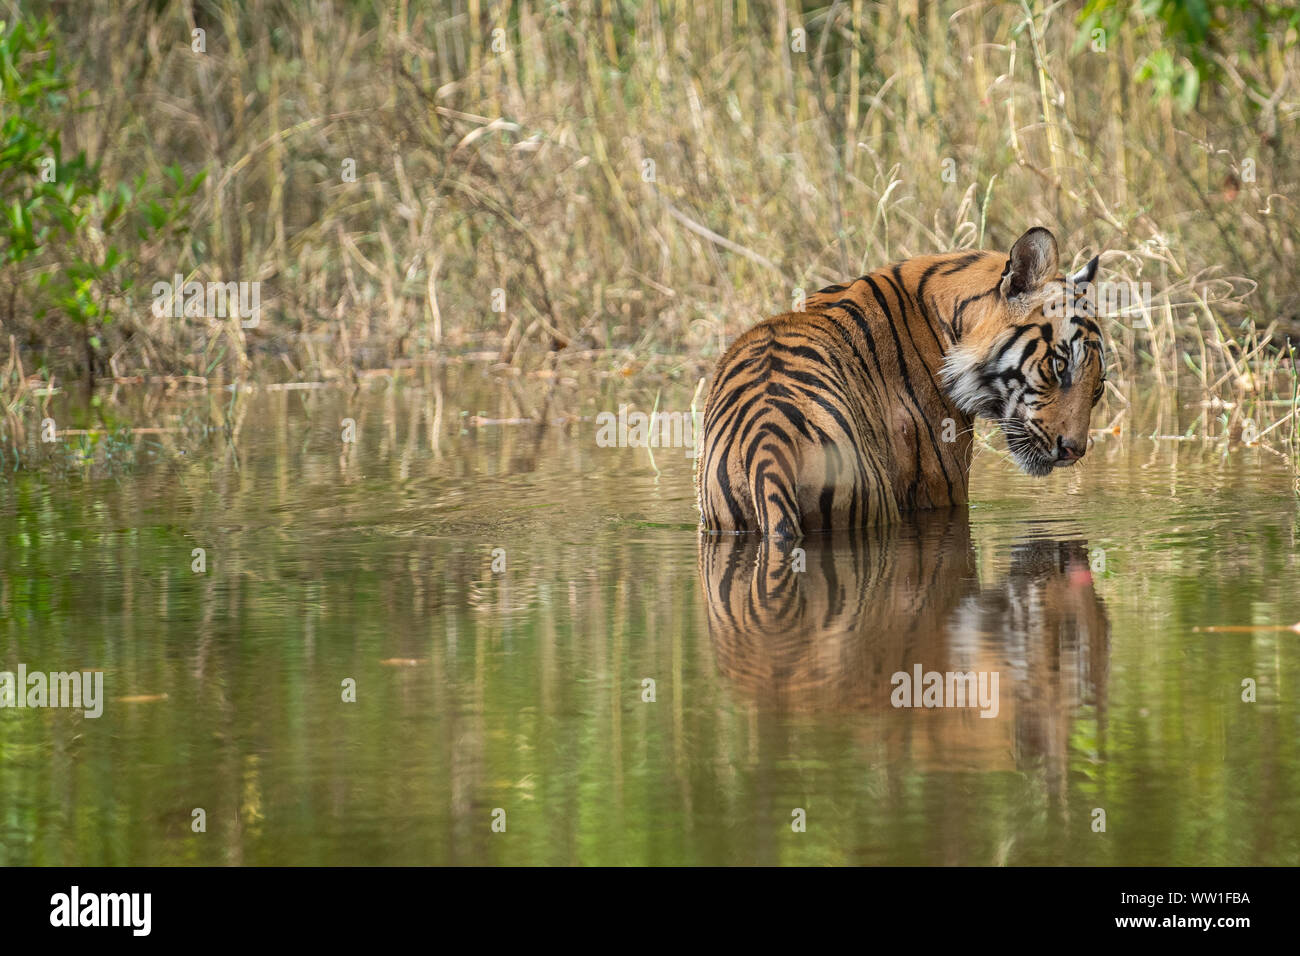 Bandhavgarh Tiger or Wild Male Bengal Tiger Cooling off in water with reflection in bandhavgarh tiger reserve or national park, Madhya pradesh, India Stock Photo